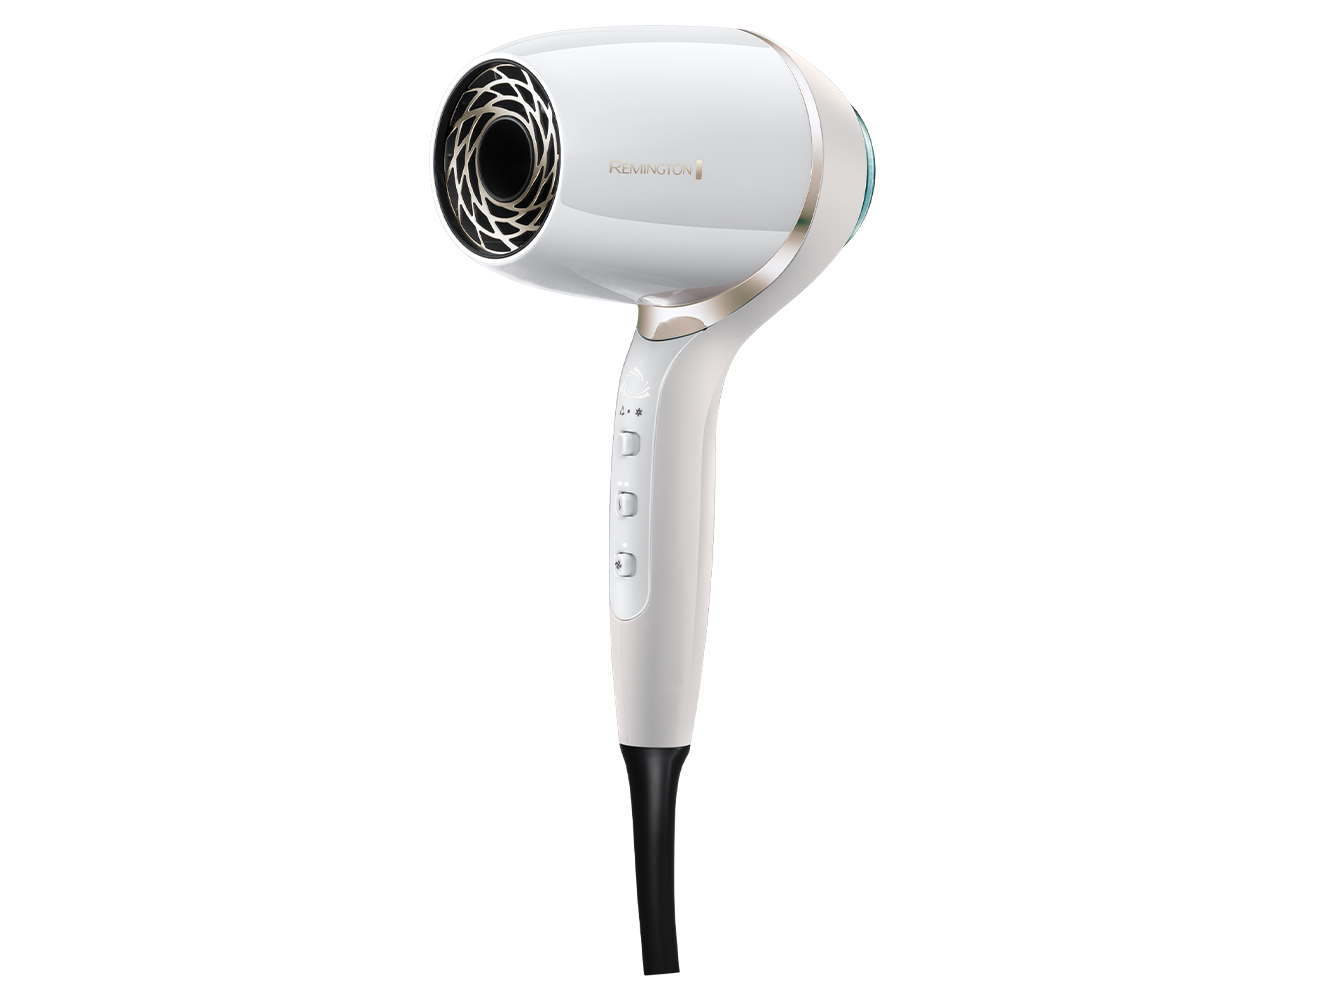 Remington hydraluxe pro hair dryer review: Does the high-tech tool protect  from heat damage? | The Independent